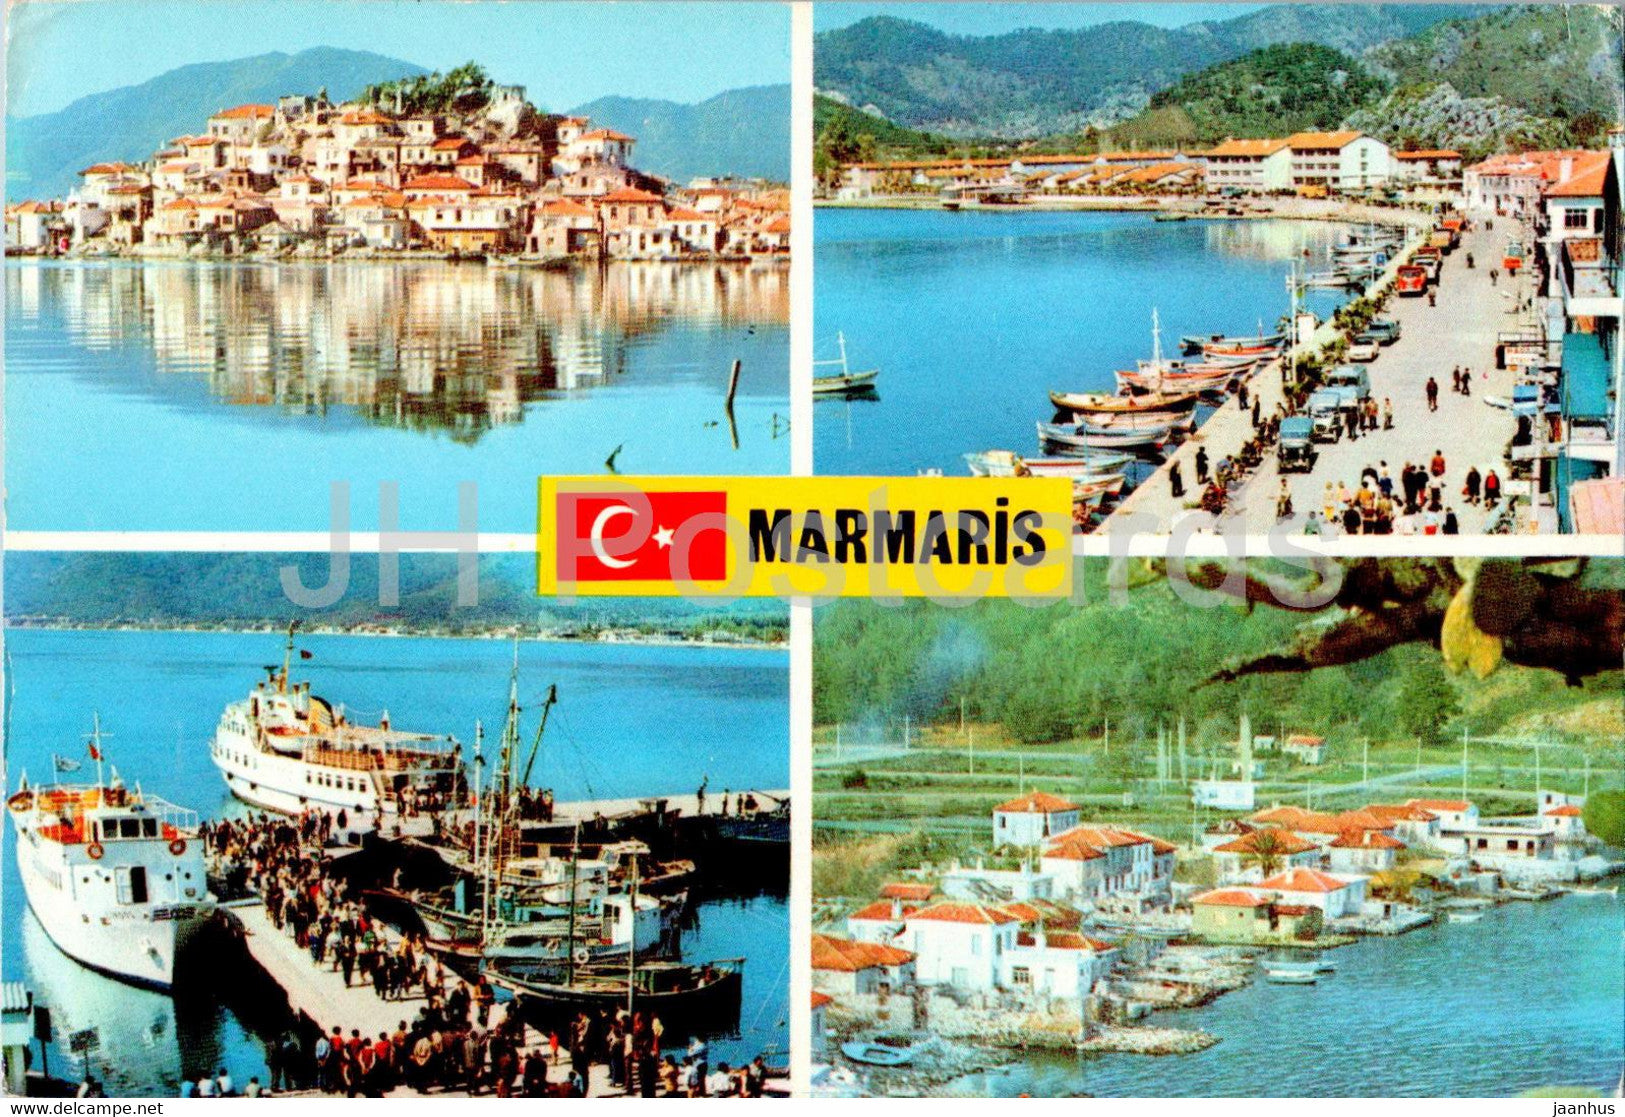 Marmaris - Views from the City - boat - ship - multiview - 1242 - Turkey - unused - JH Postcards